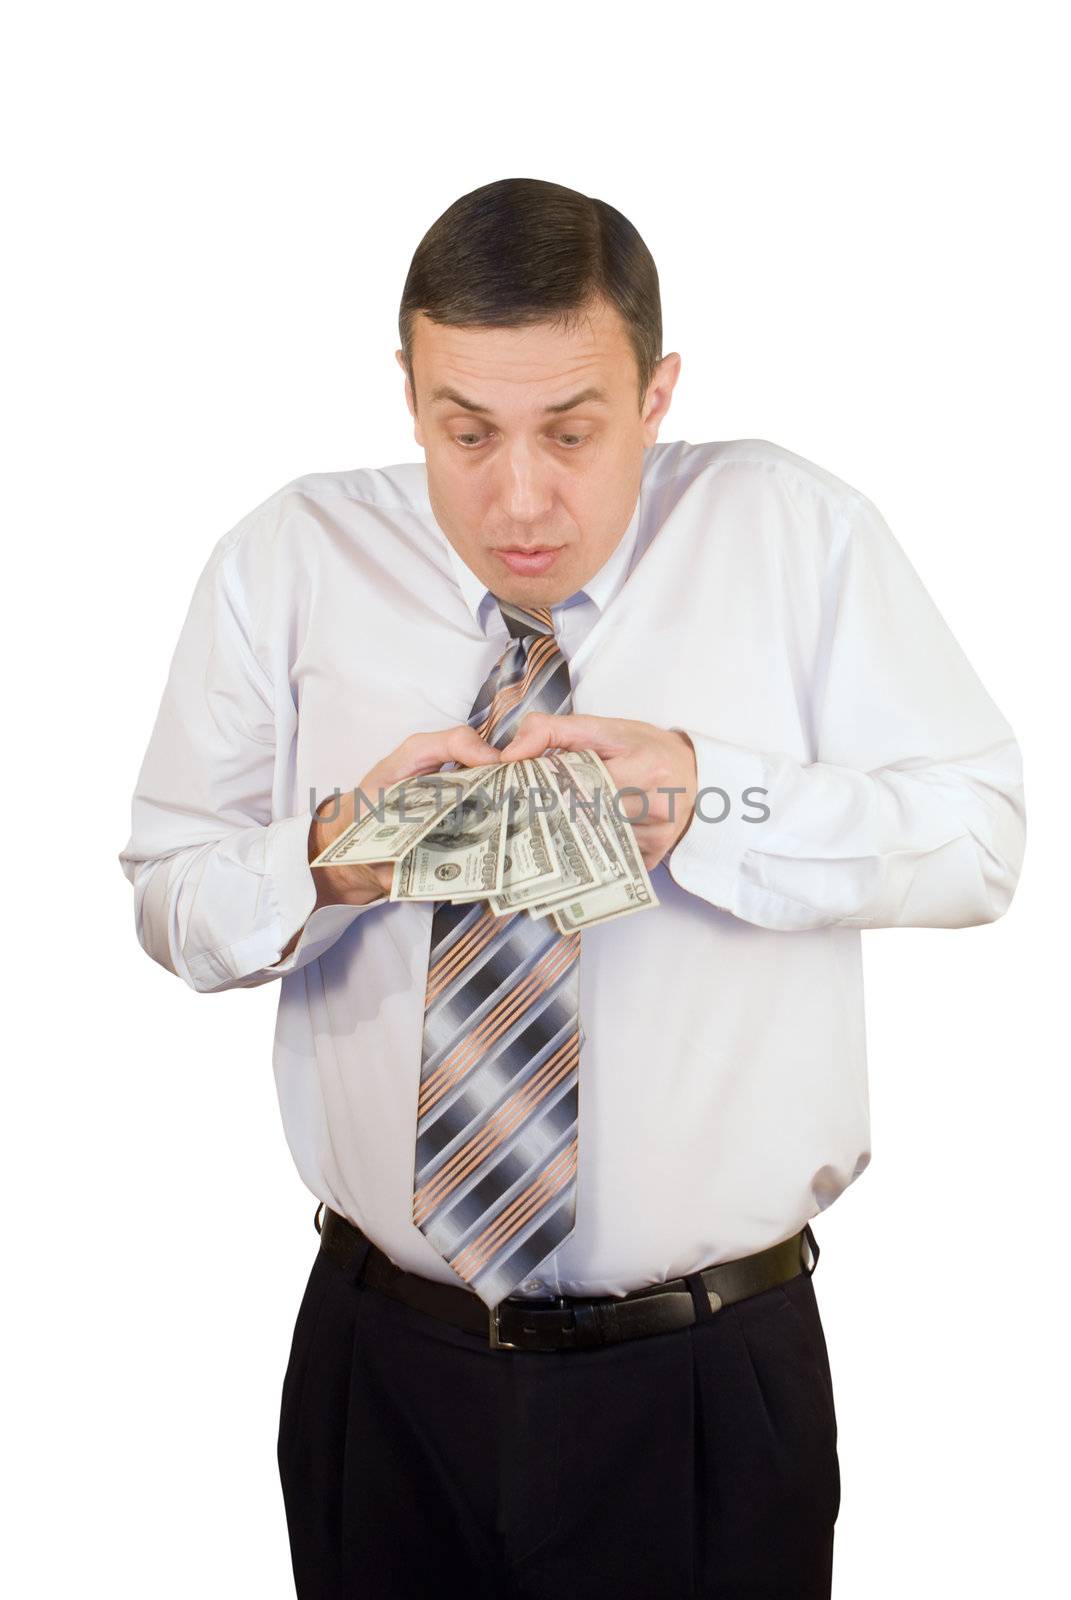 The businessman does not know what to do with the first earned money